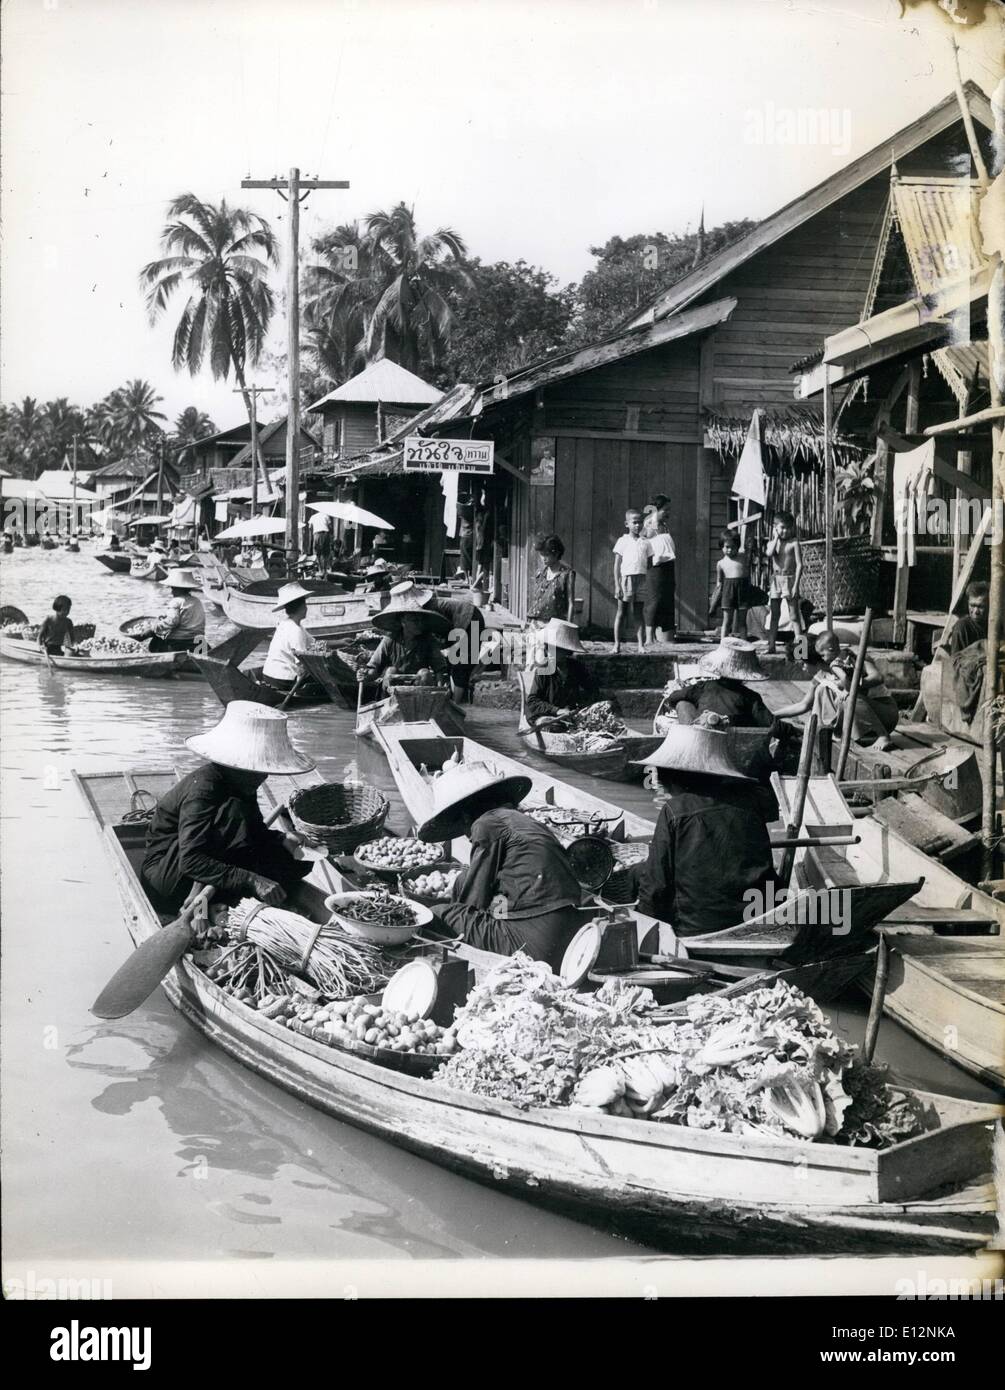 Feb. 24, 2012 - Bangkok-Thailand. Floating fruit and vegetable stalls in the market. All kinds of produce fill the boats also the scales for weighing. Men and women alike wear huge straw hats to protect them from the hot sunshine. Stock Photo